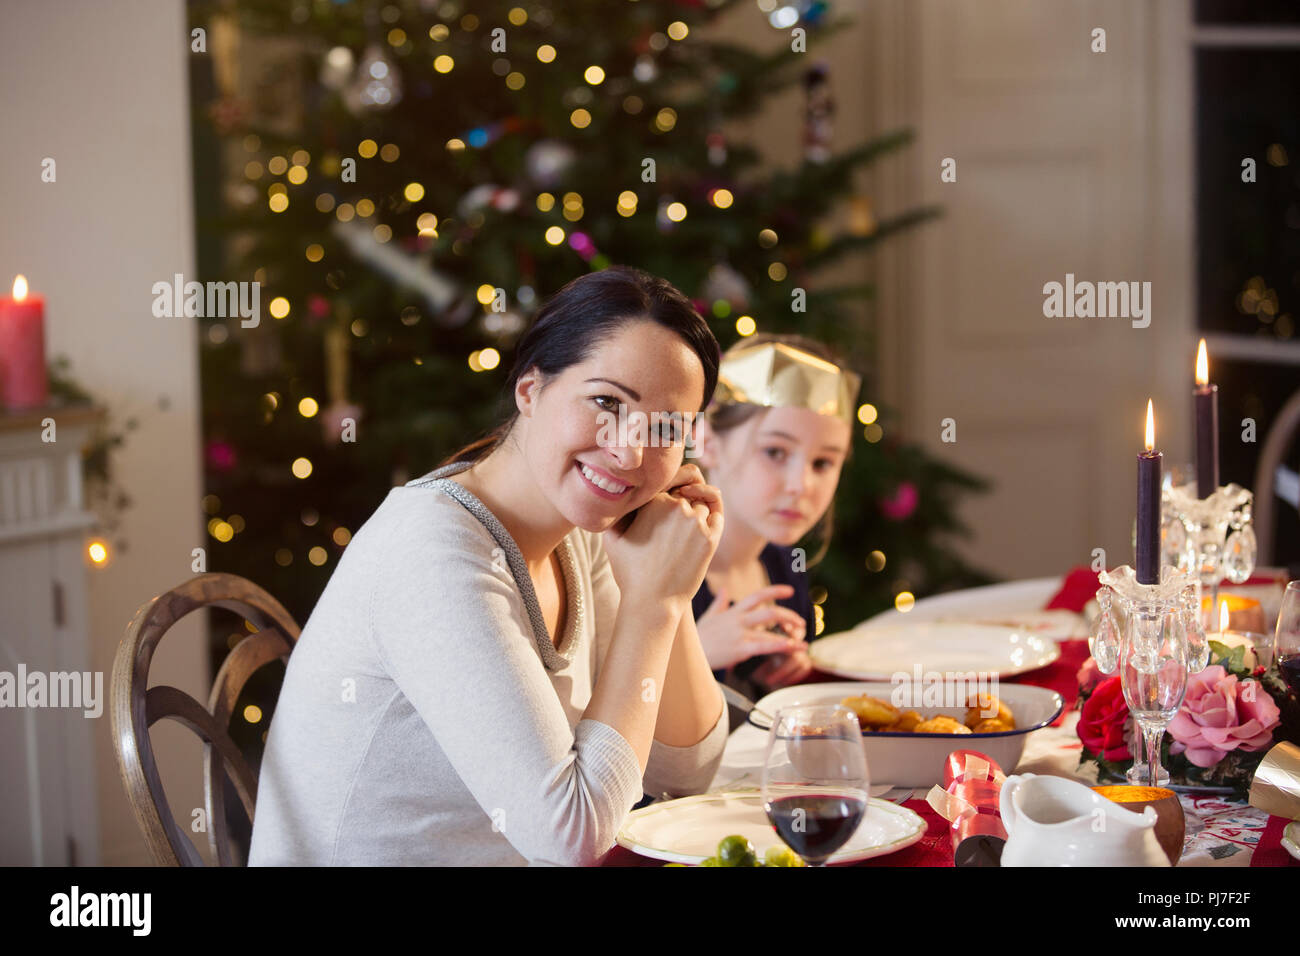 Portrait of smiling mother and daughter enjoying Christmas dinner aux chandelles Banque D'Images